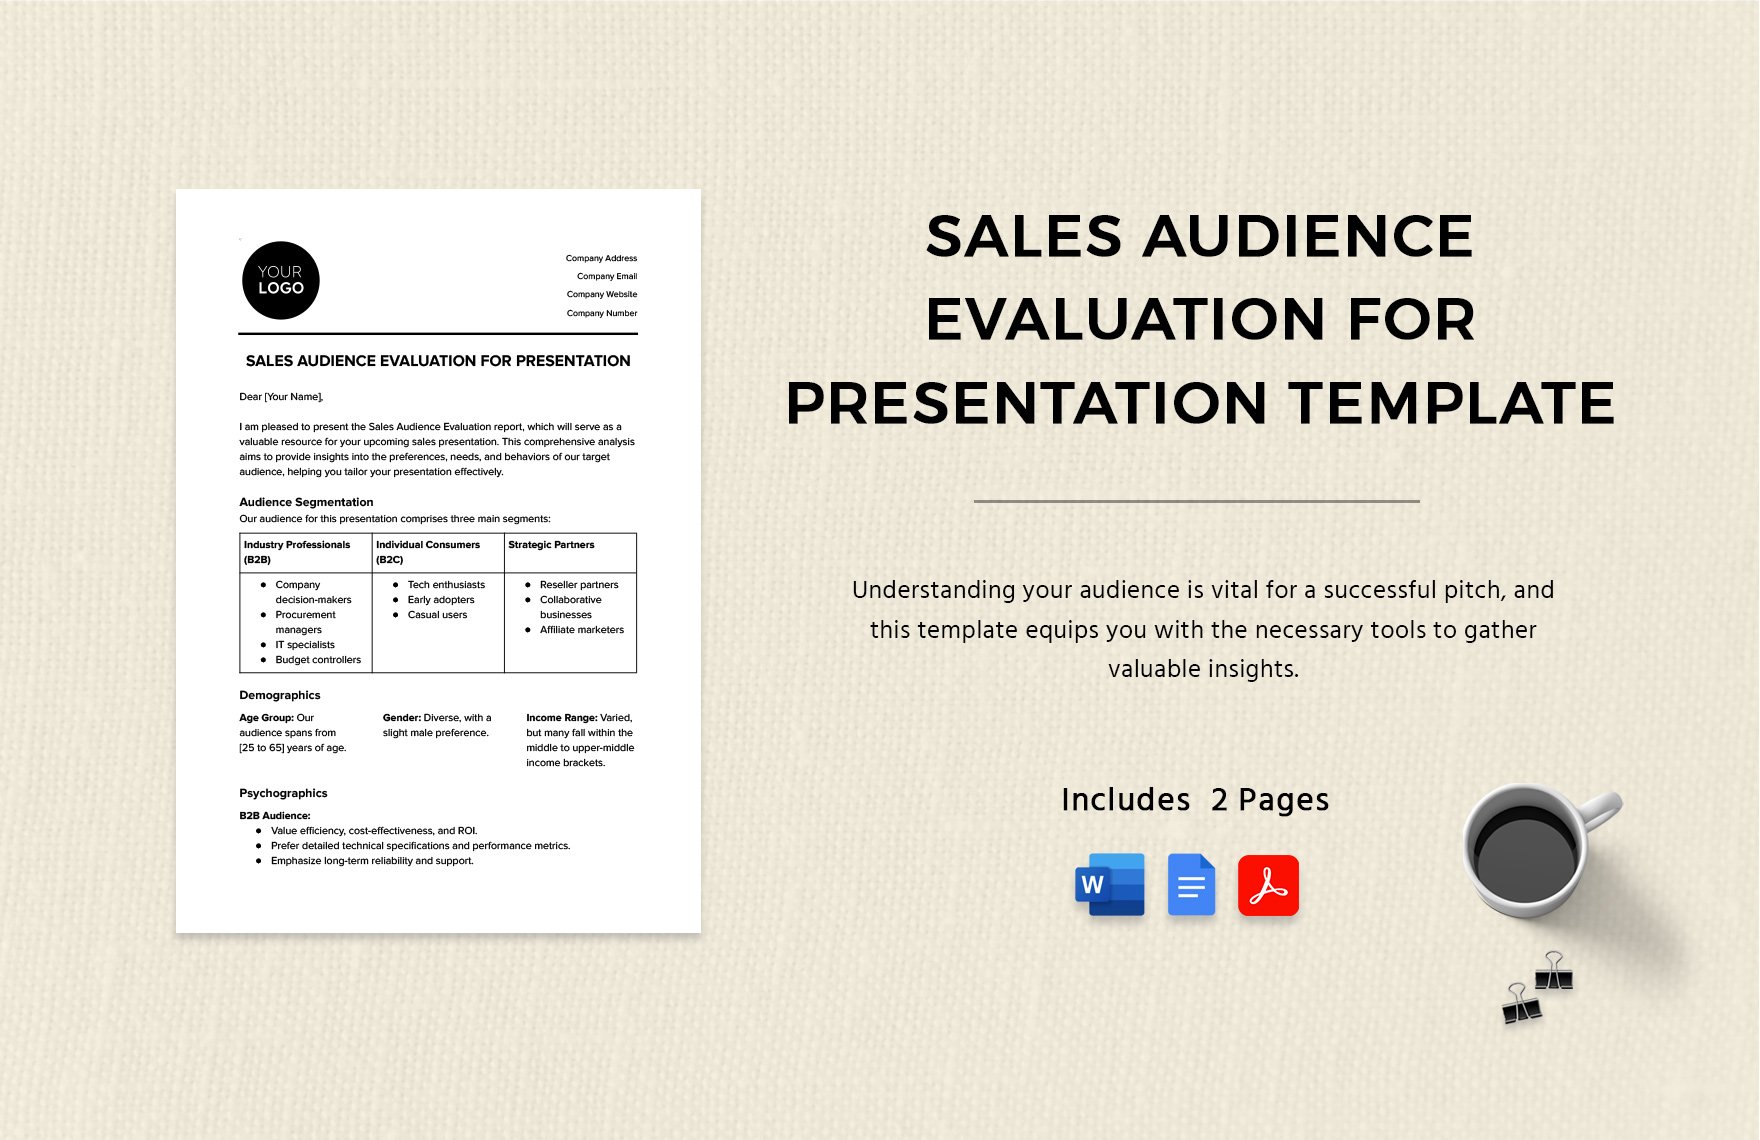  Sales Audience Evaluation for Presentation Template